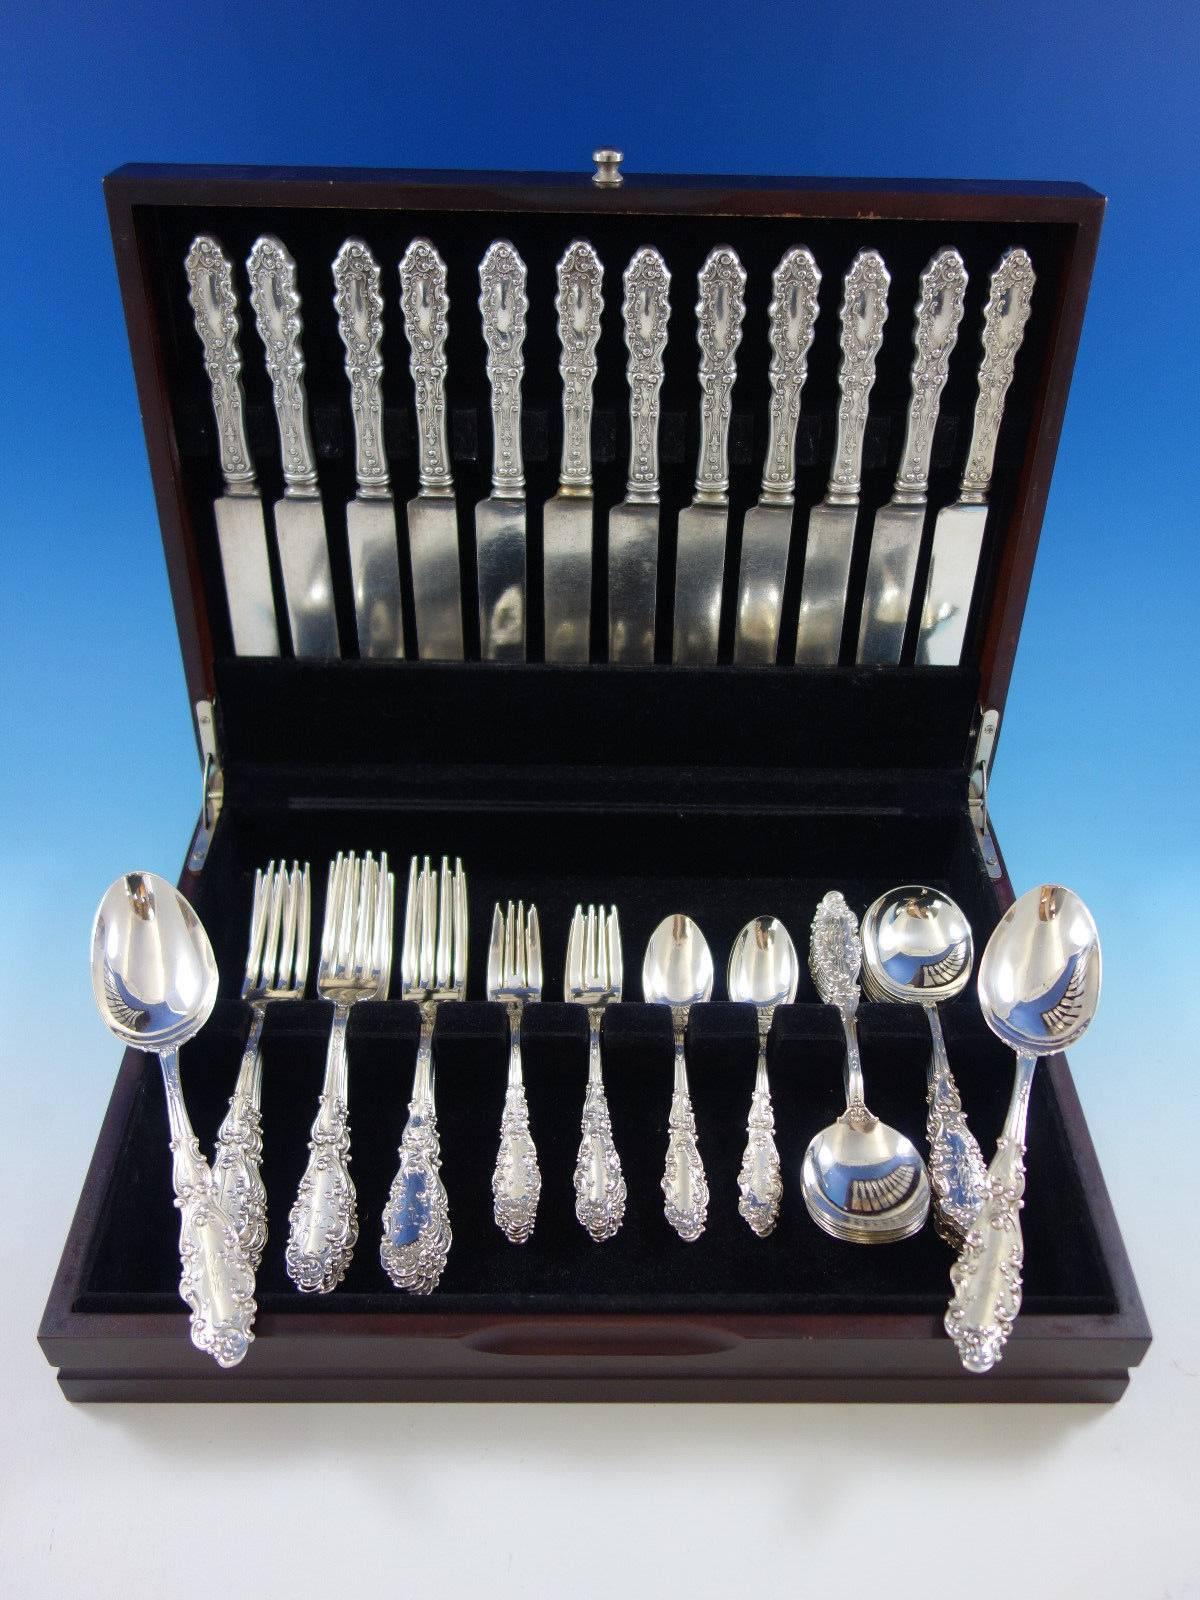 Dinner size Luxembourg by Gorham sterling silver flatware set - 62 pieces. This set includes: 

12 dinner size knives, 9 1/2